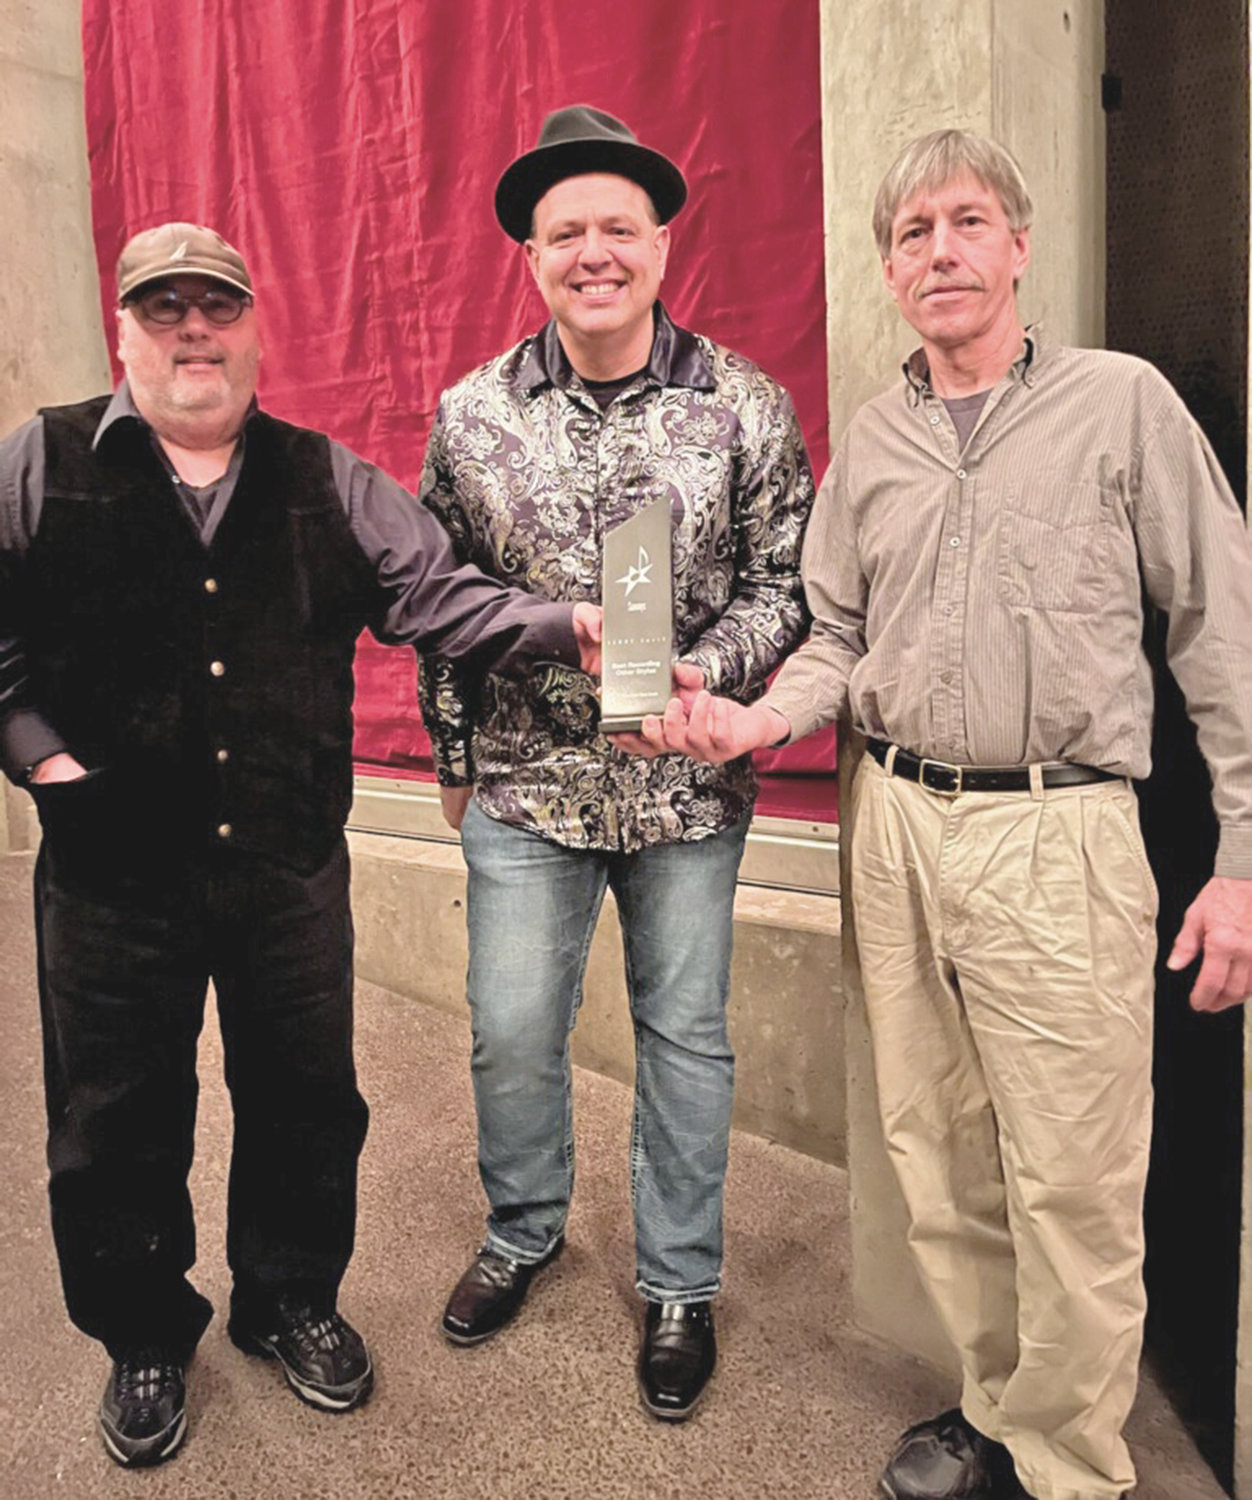 AWARD WINNERS — Members of Fritz’s Polka Band, from left, Gabe Vaccaro, Fritz Scherz, and Frank Nelson, pose with their SAMMY Award.